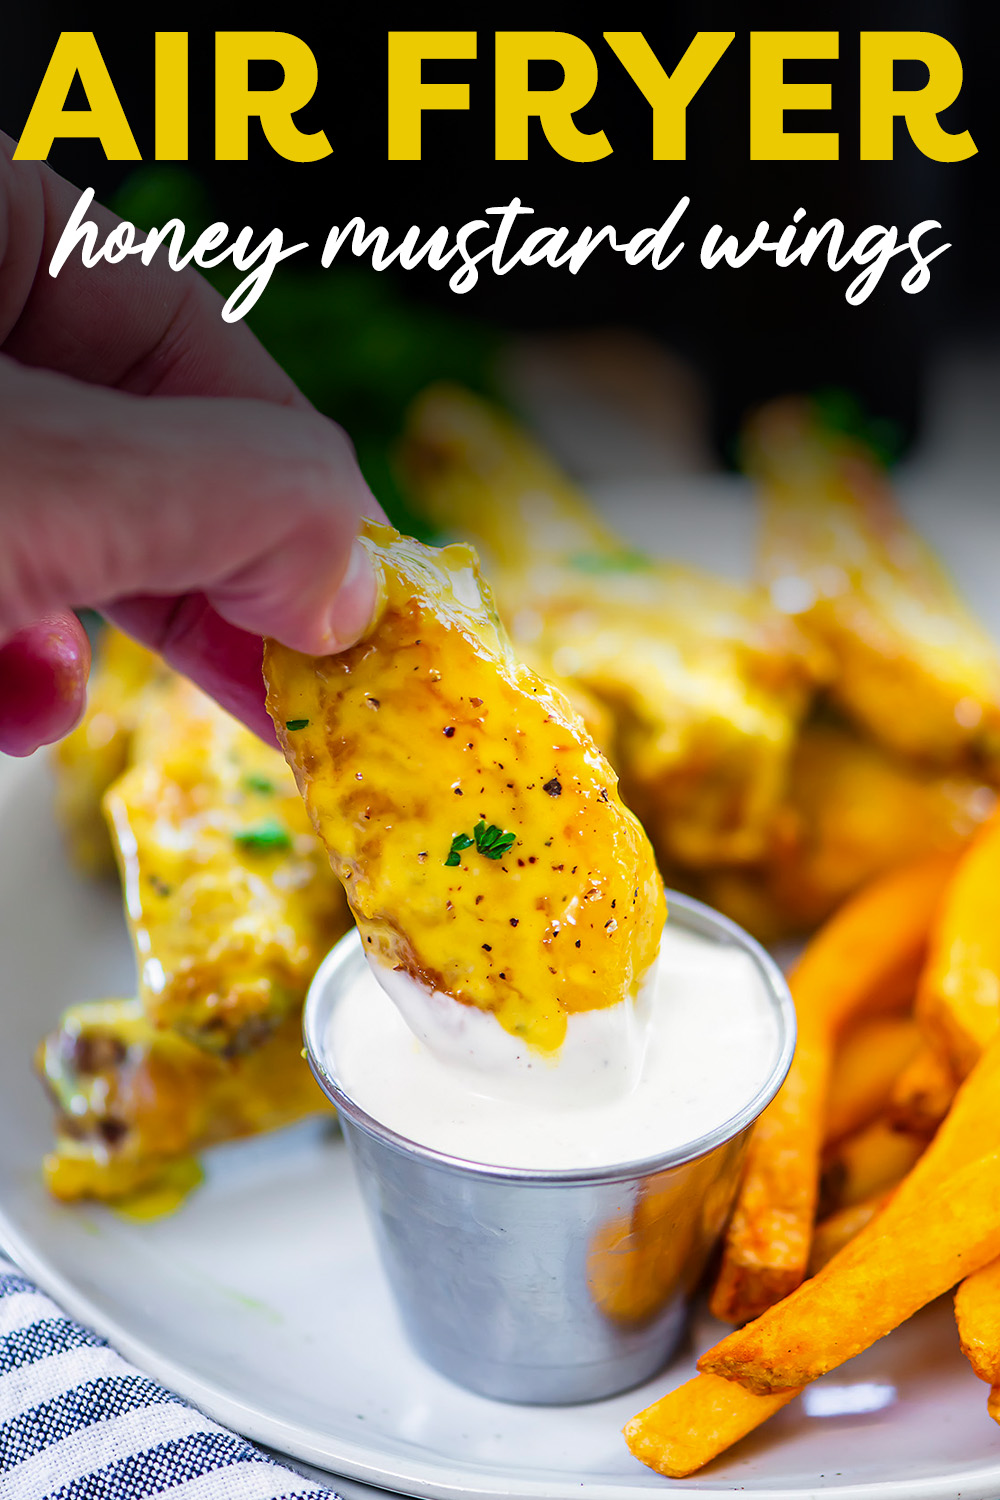 Honey mustard wing being dipped into ranch dressing.